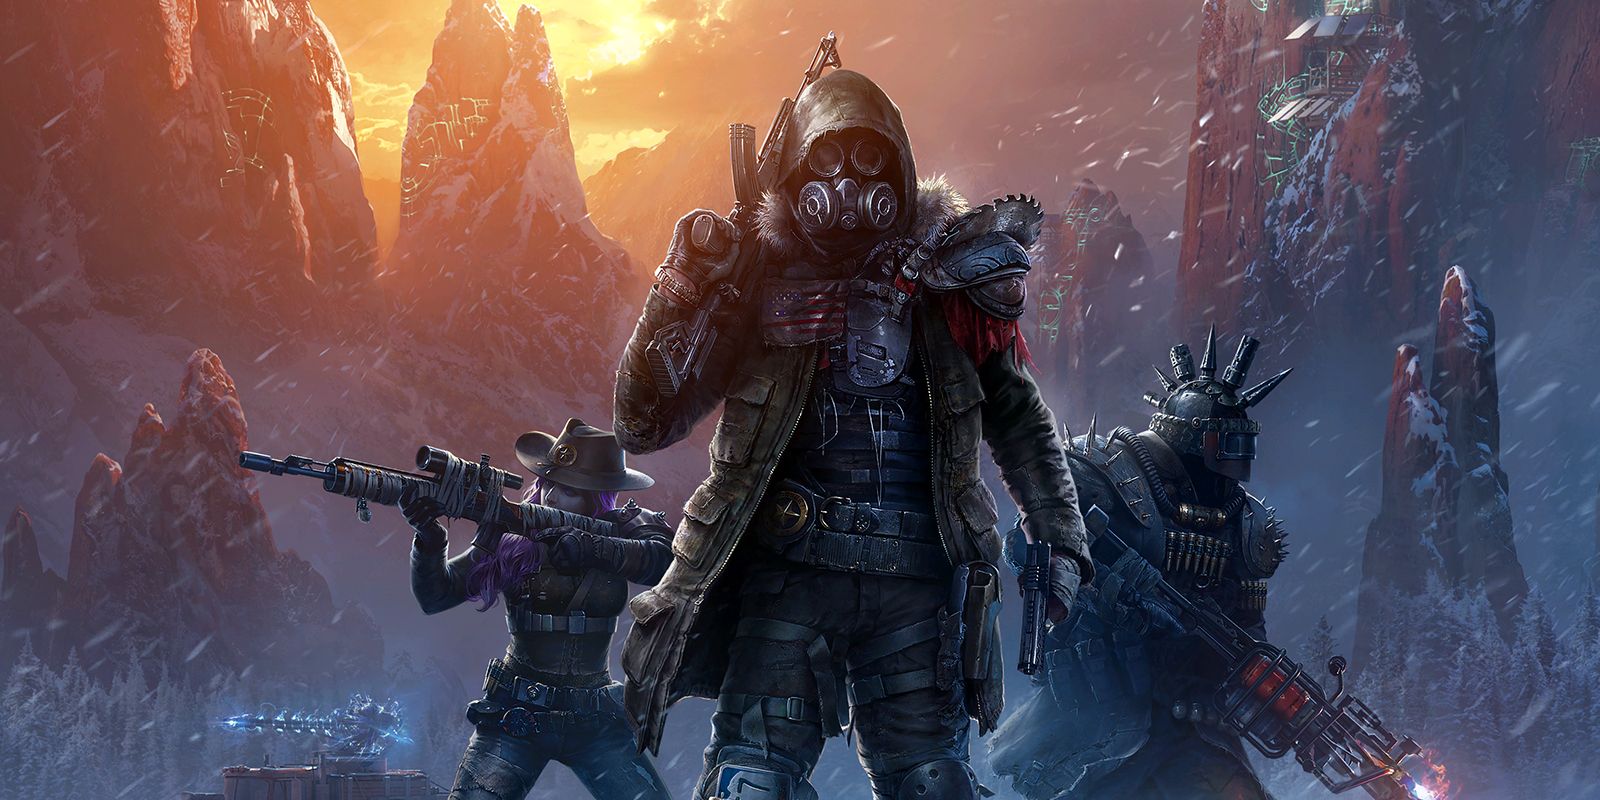 The artwork for Wasteland 3, featuring several armed characters in a snowy setting.